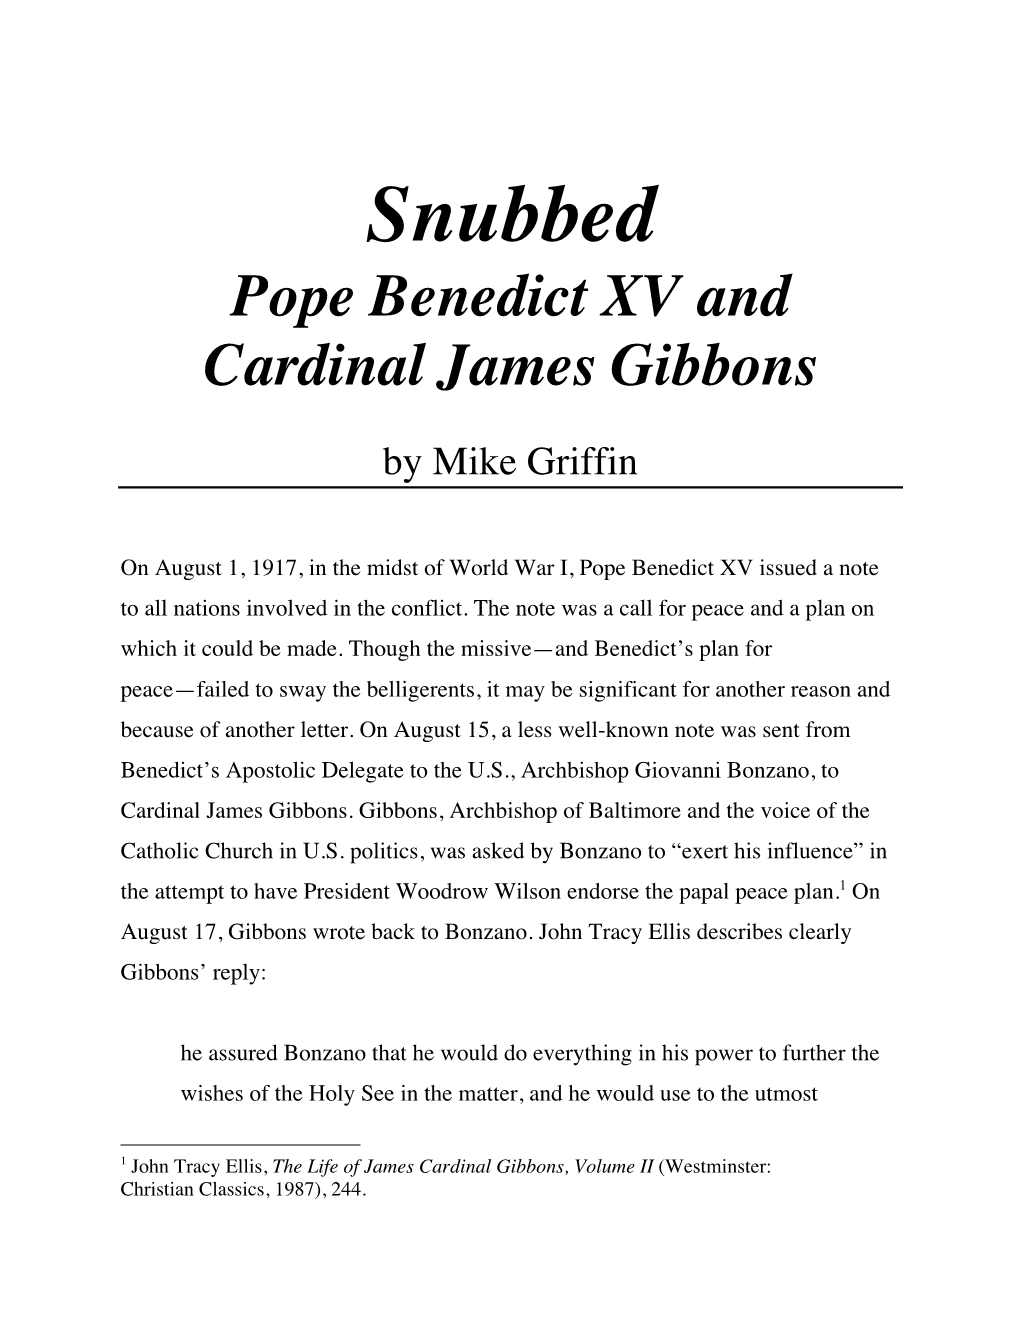 Snubbed, Pope Benedict XV and Cardinal James Gibbons